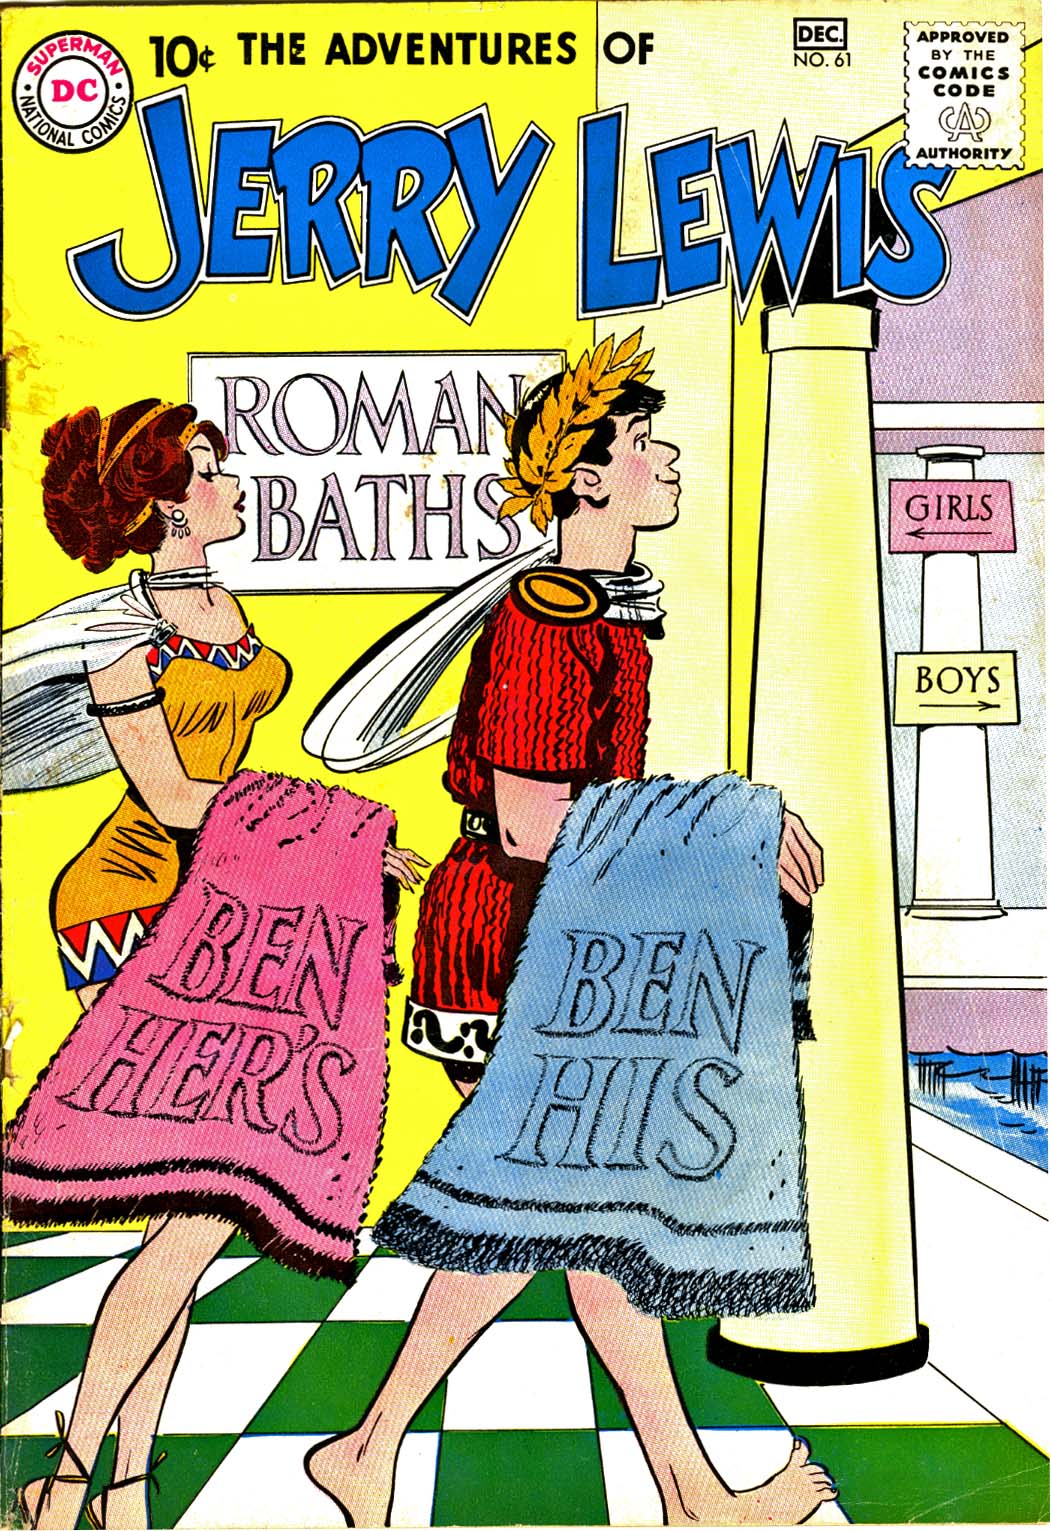 Read online The Adventures of Jerry Lewis comic -  Issue #61 - 1